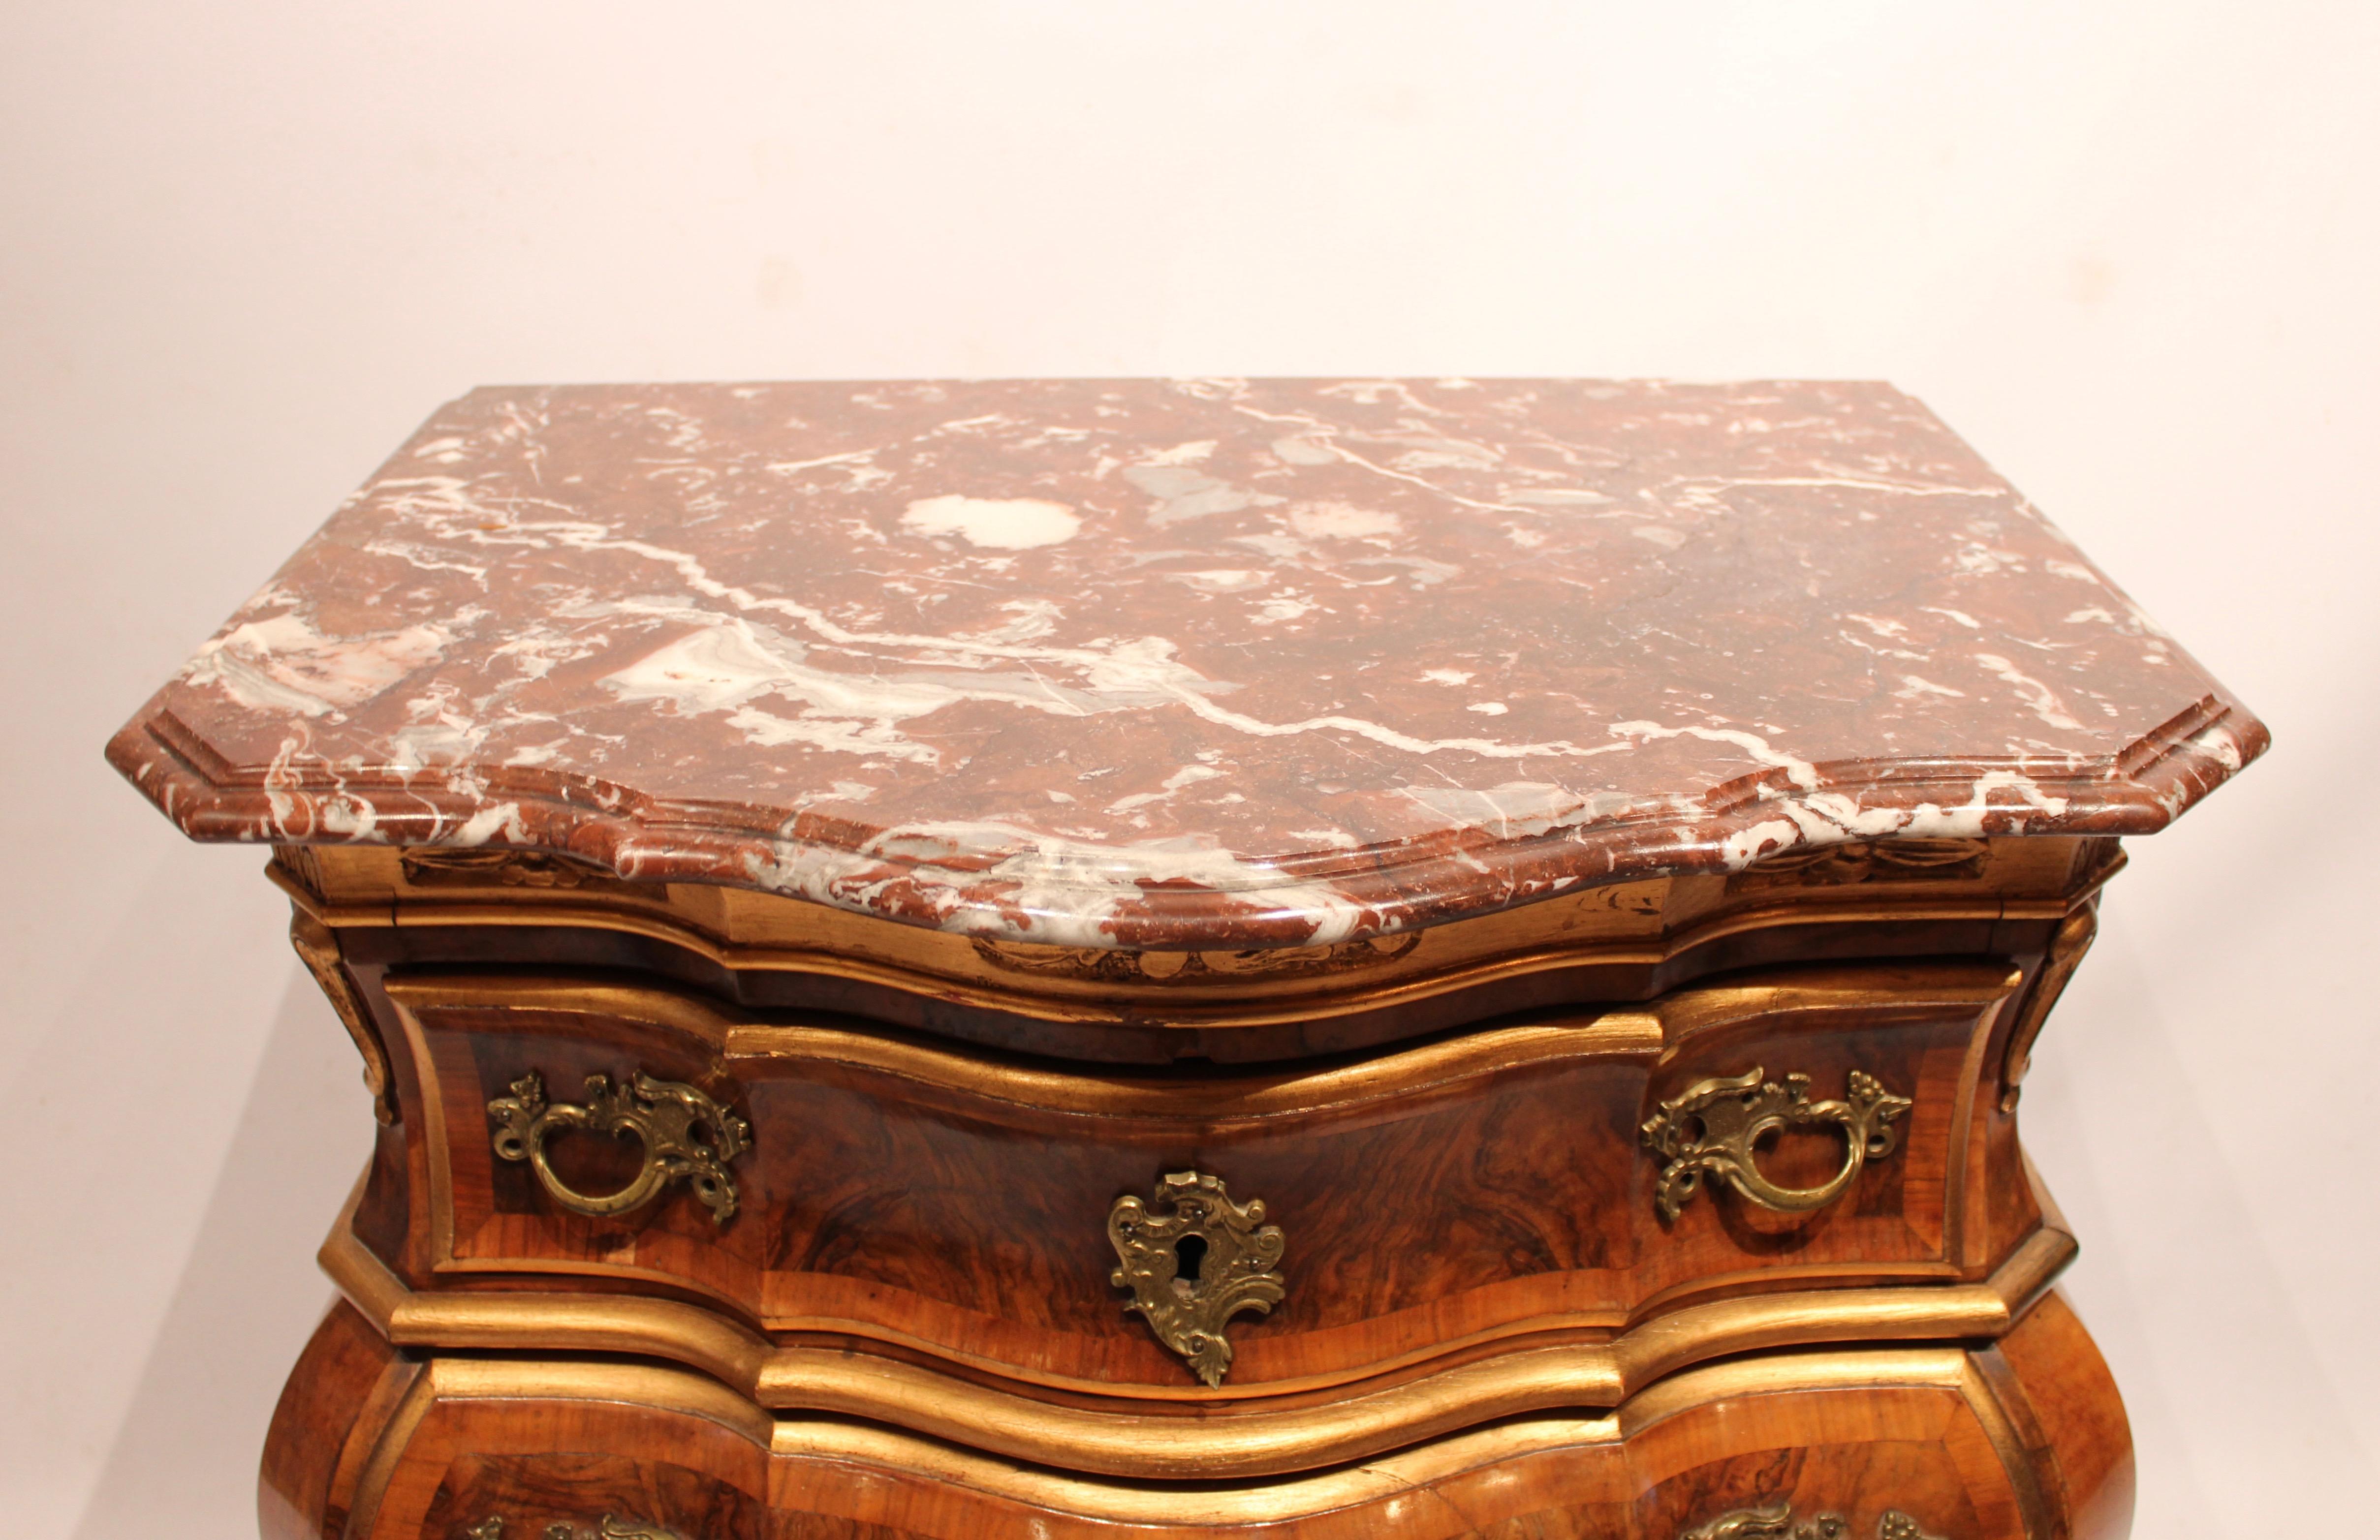 Chest of Drawers of Walnut with Marble Top Plate from Denmark, circa 1880s (Dänisch)